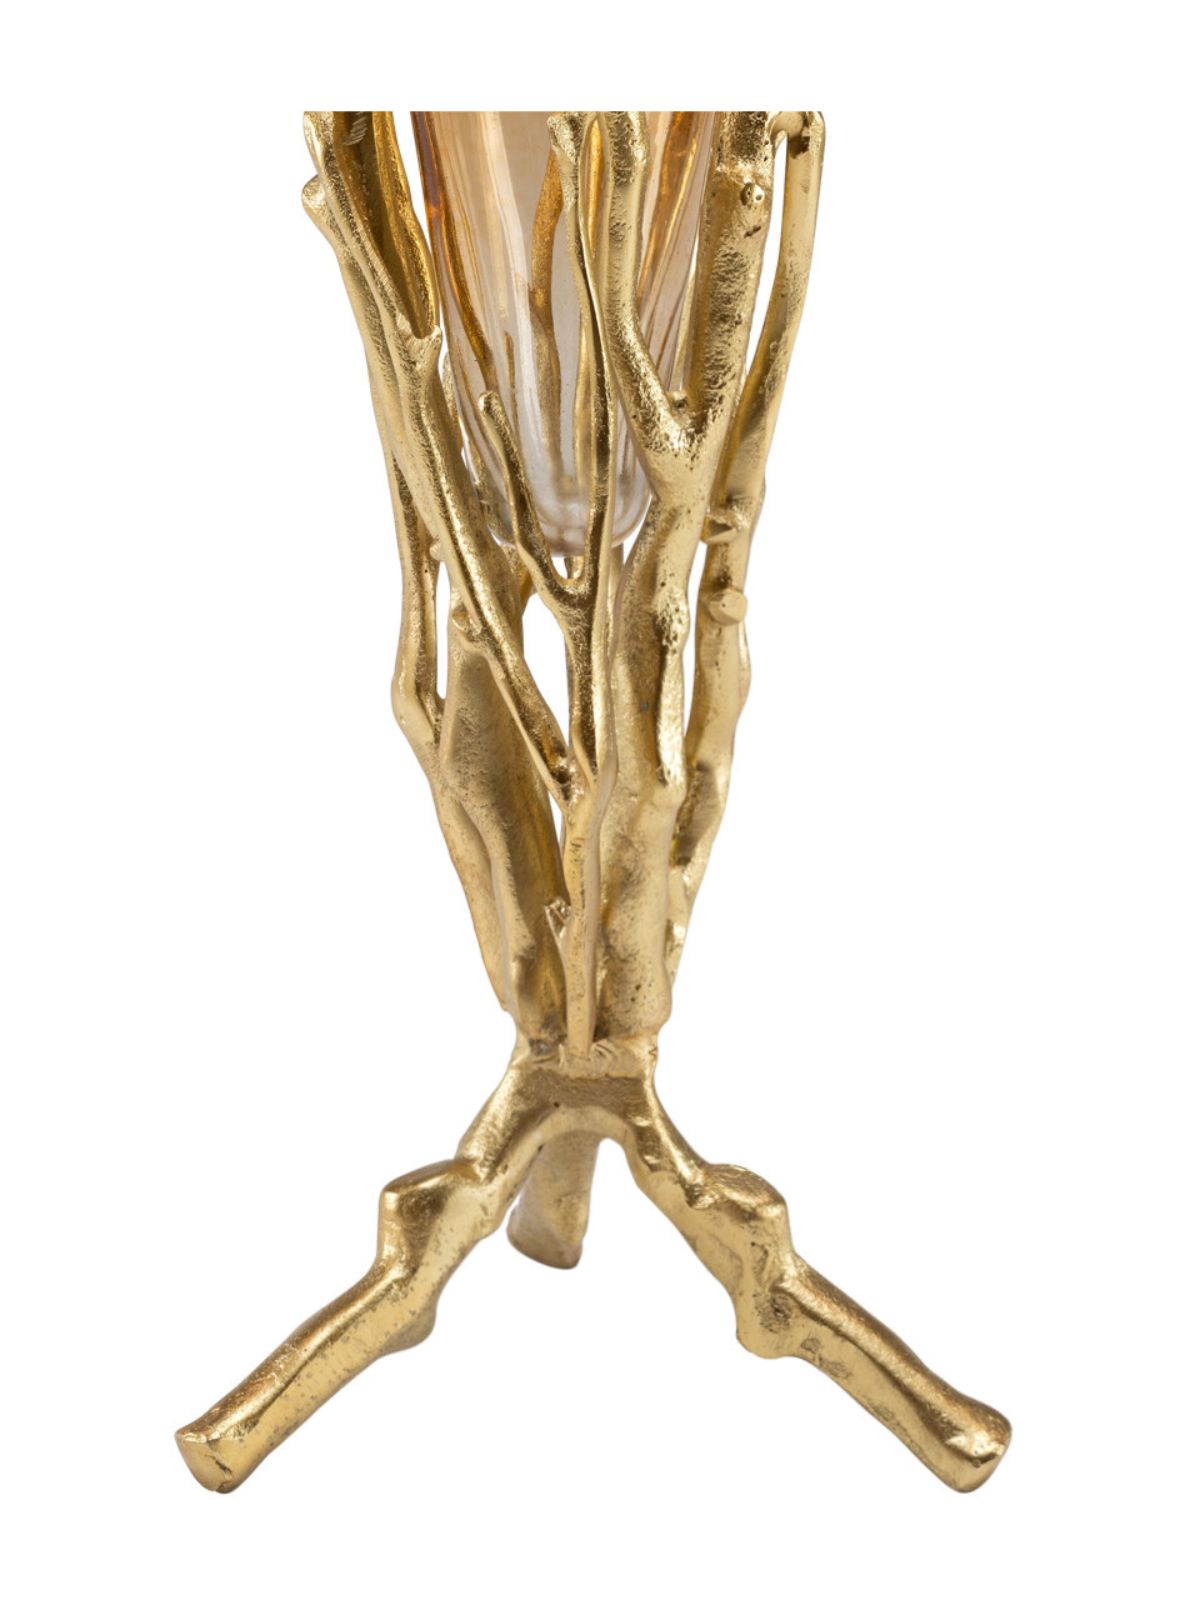 Enjoy this 27H golden floral vase as a decorative centerpiece featuring a gold tree branch metal base with a glass vase insert.